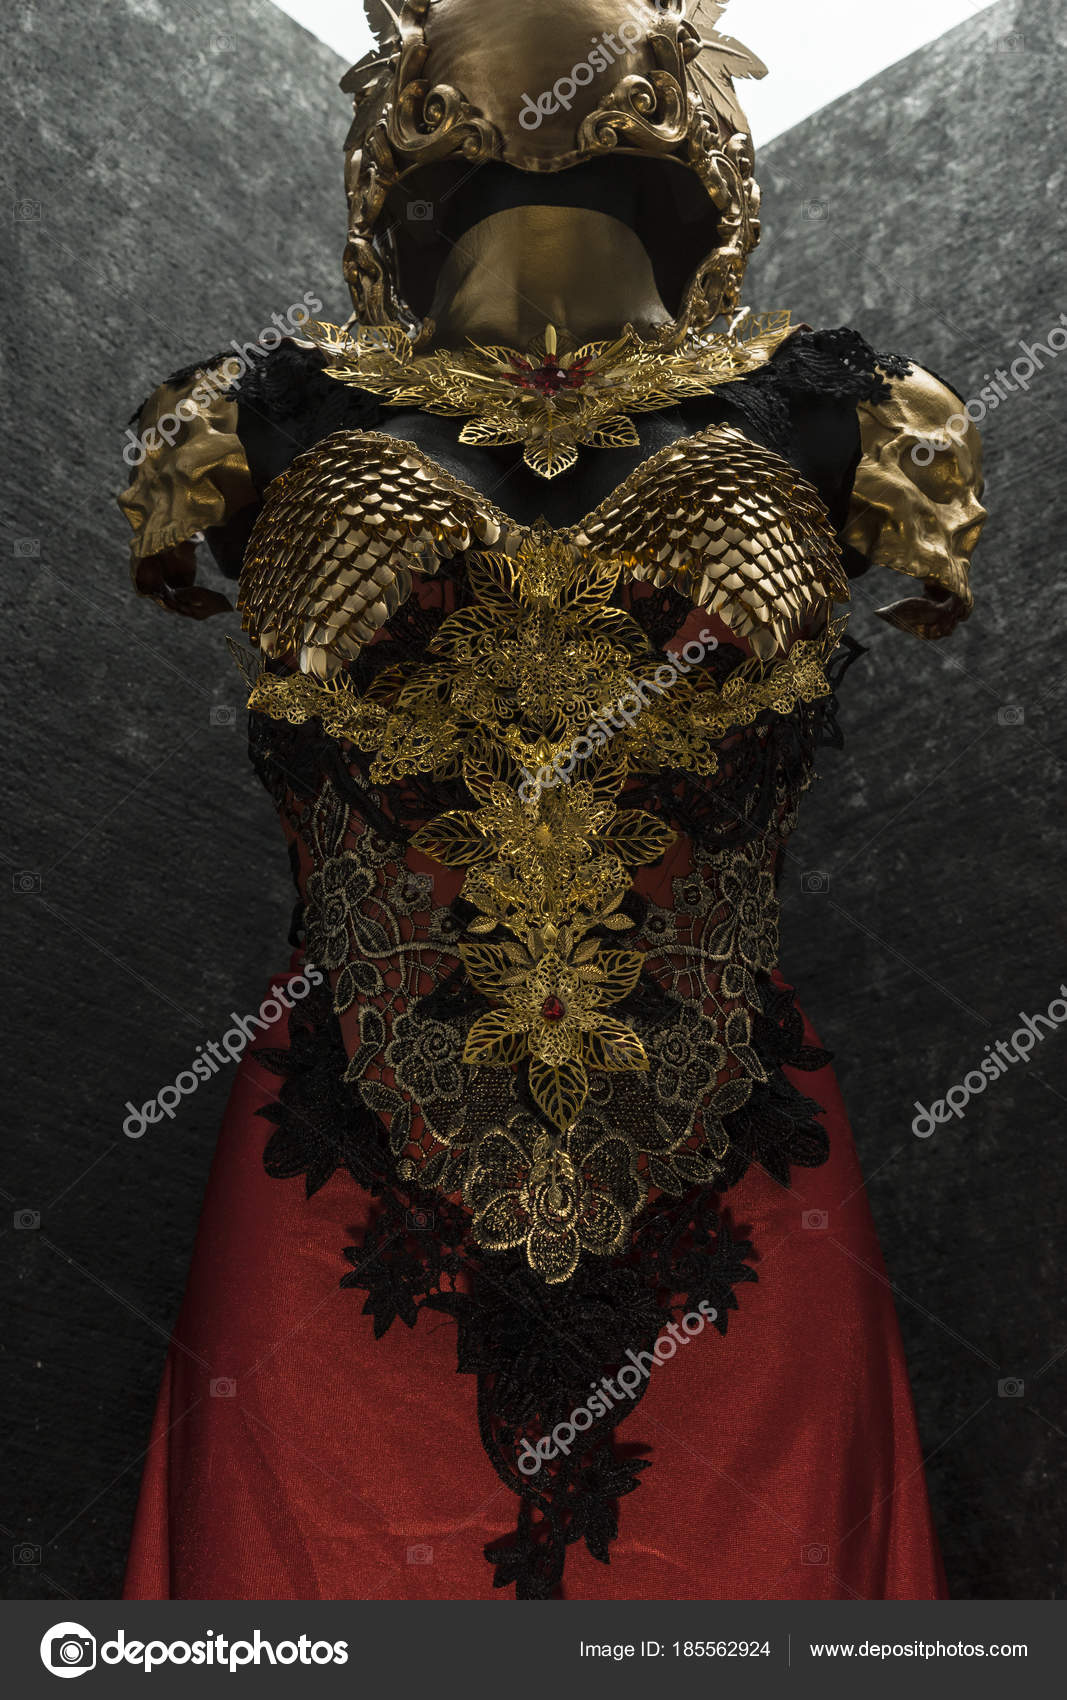 Knight Gold Armor Metal Pieces Handmade Has Golden Breastplate